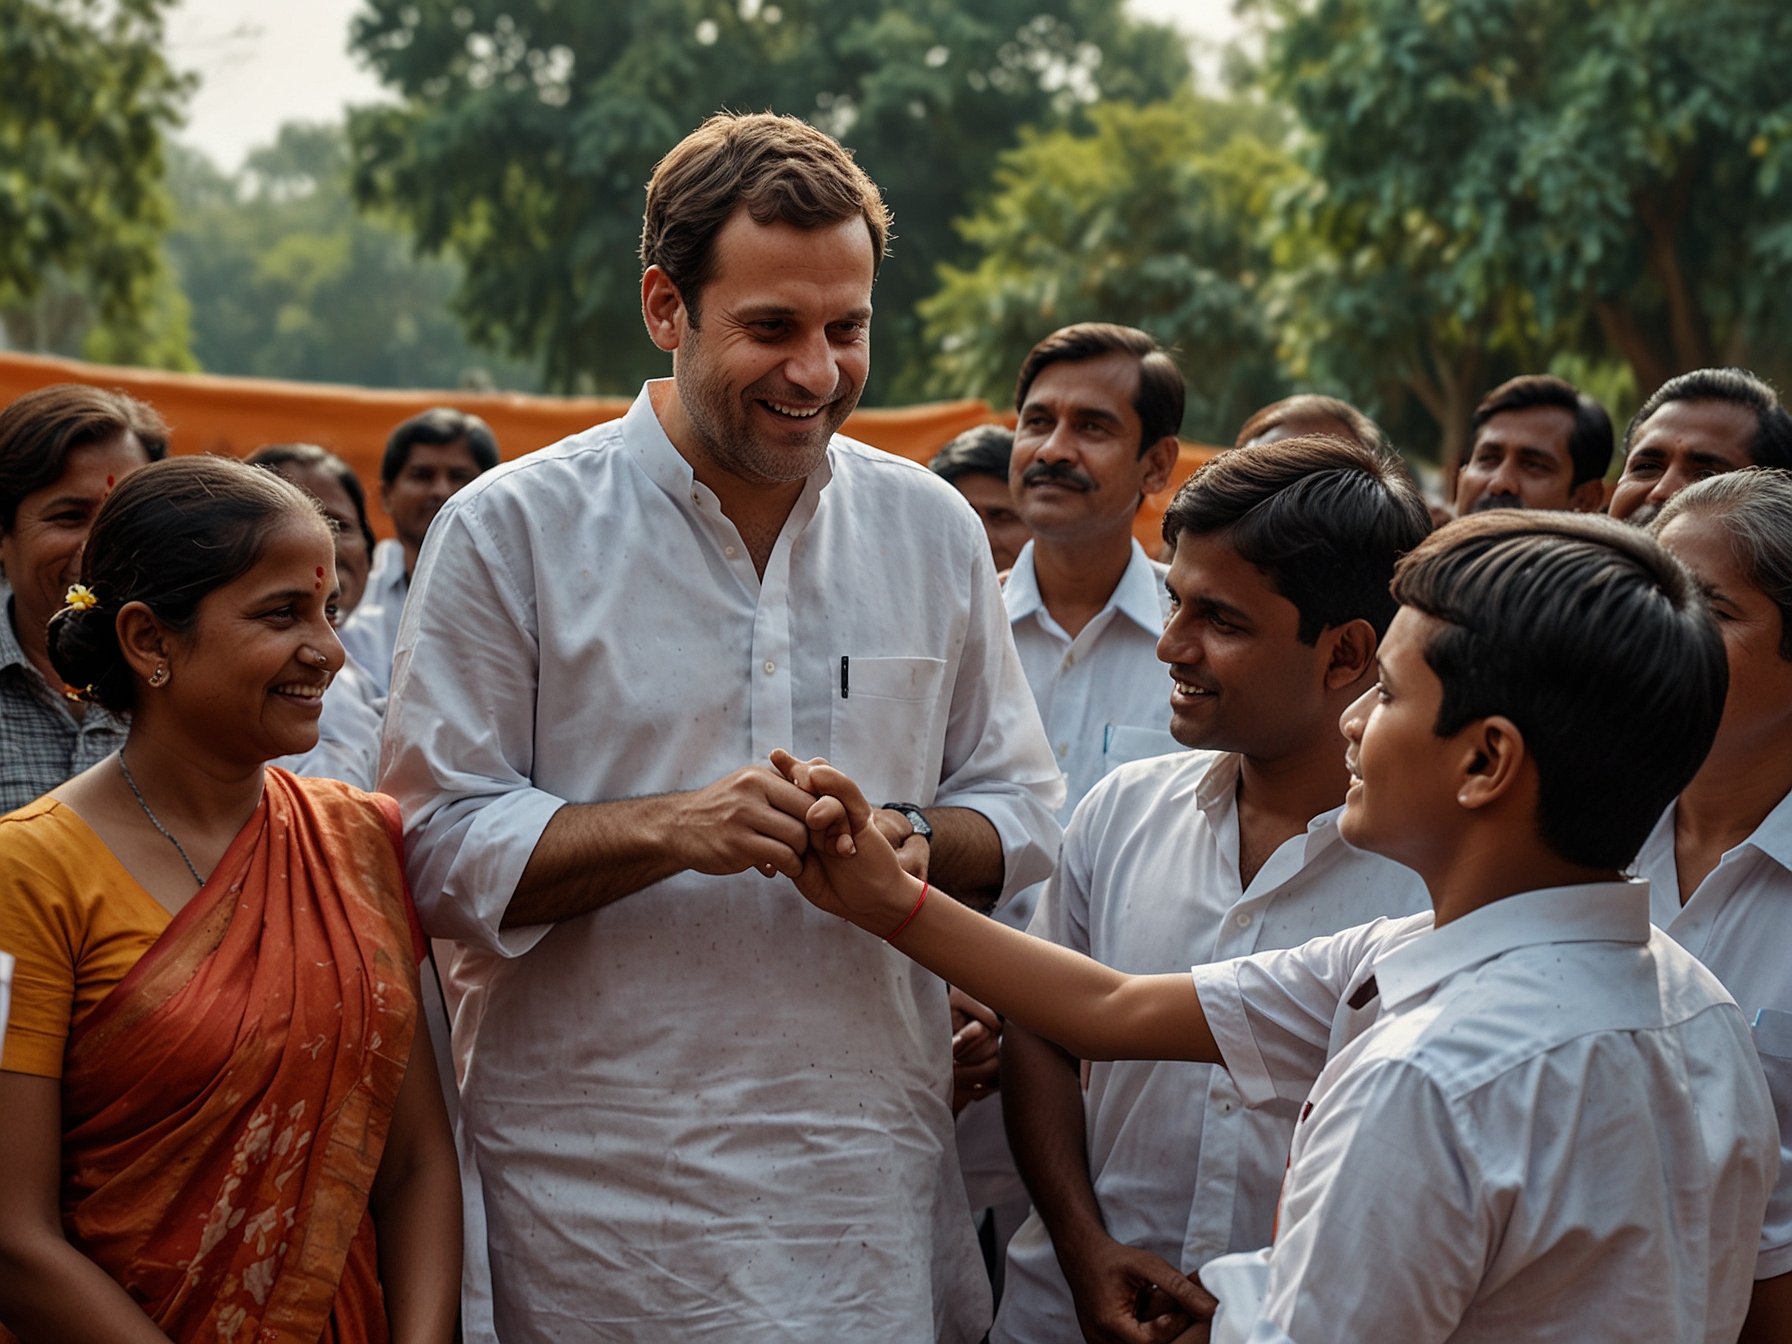 Rahul Gandhi interacting with the people of Rae Bareli, representing the emotional and familial bonds that influence his political decisions, highlighting his dedication to the constituency.